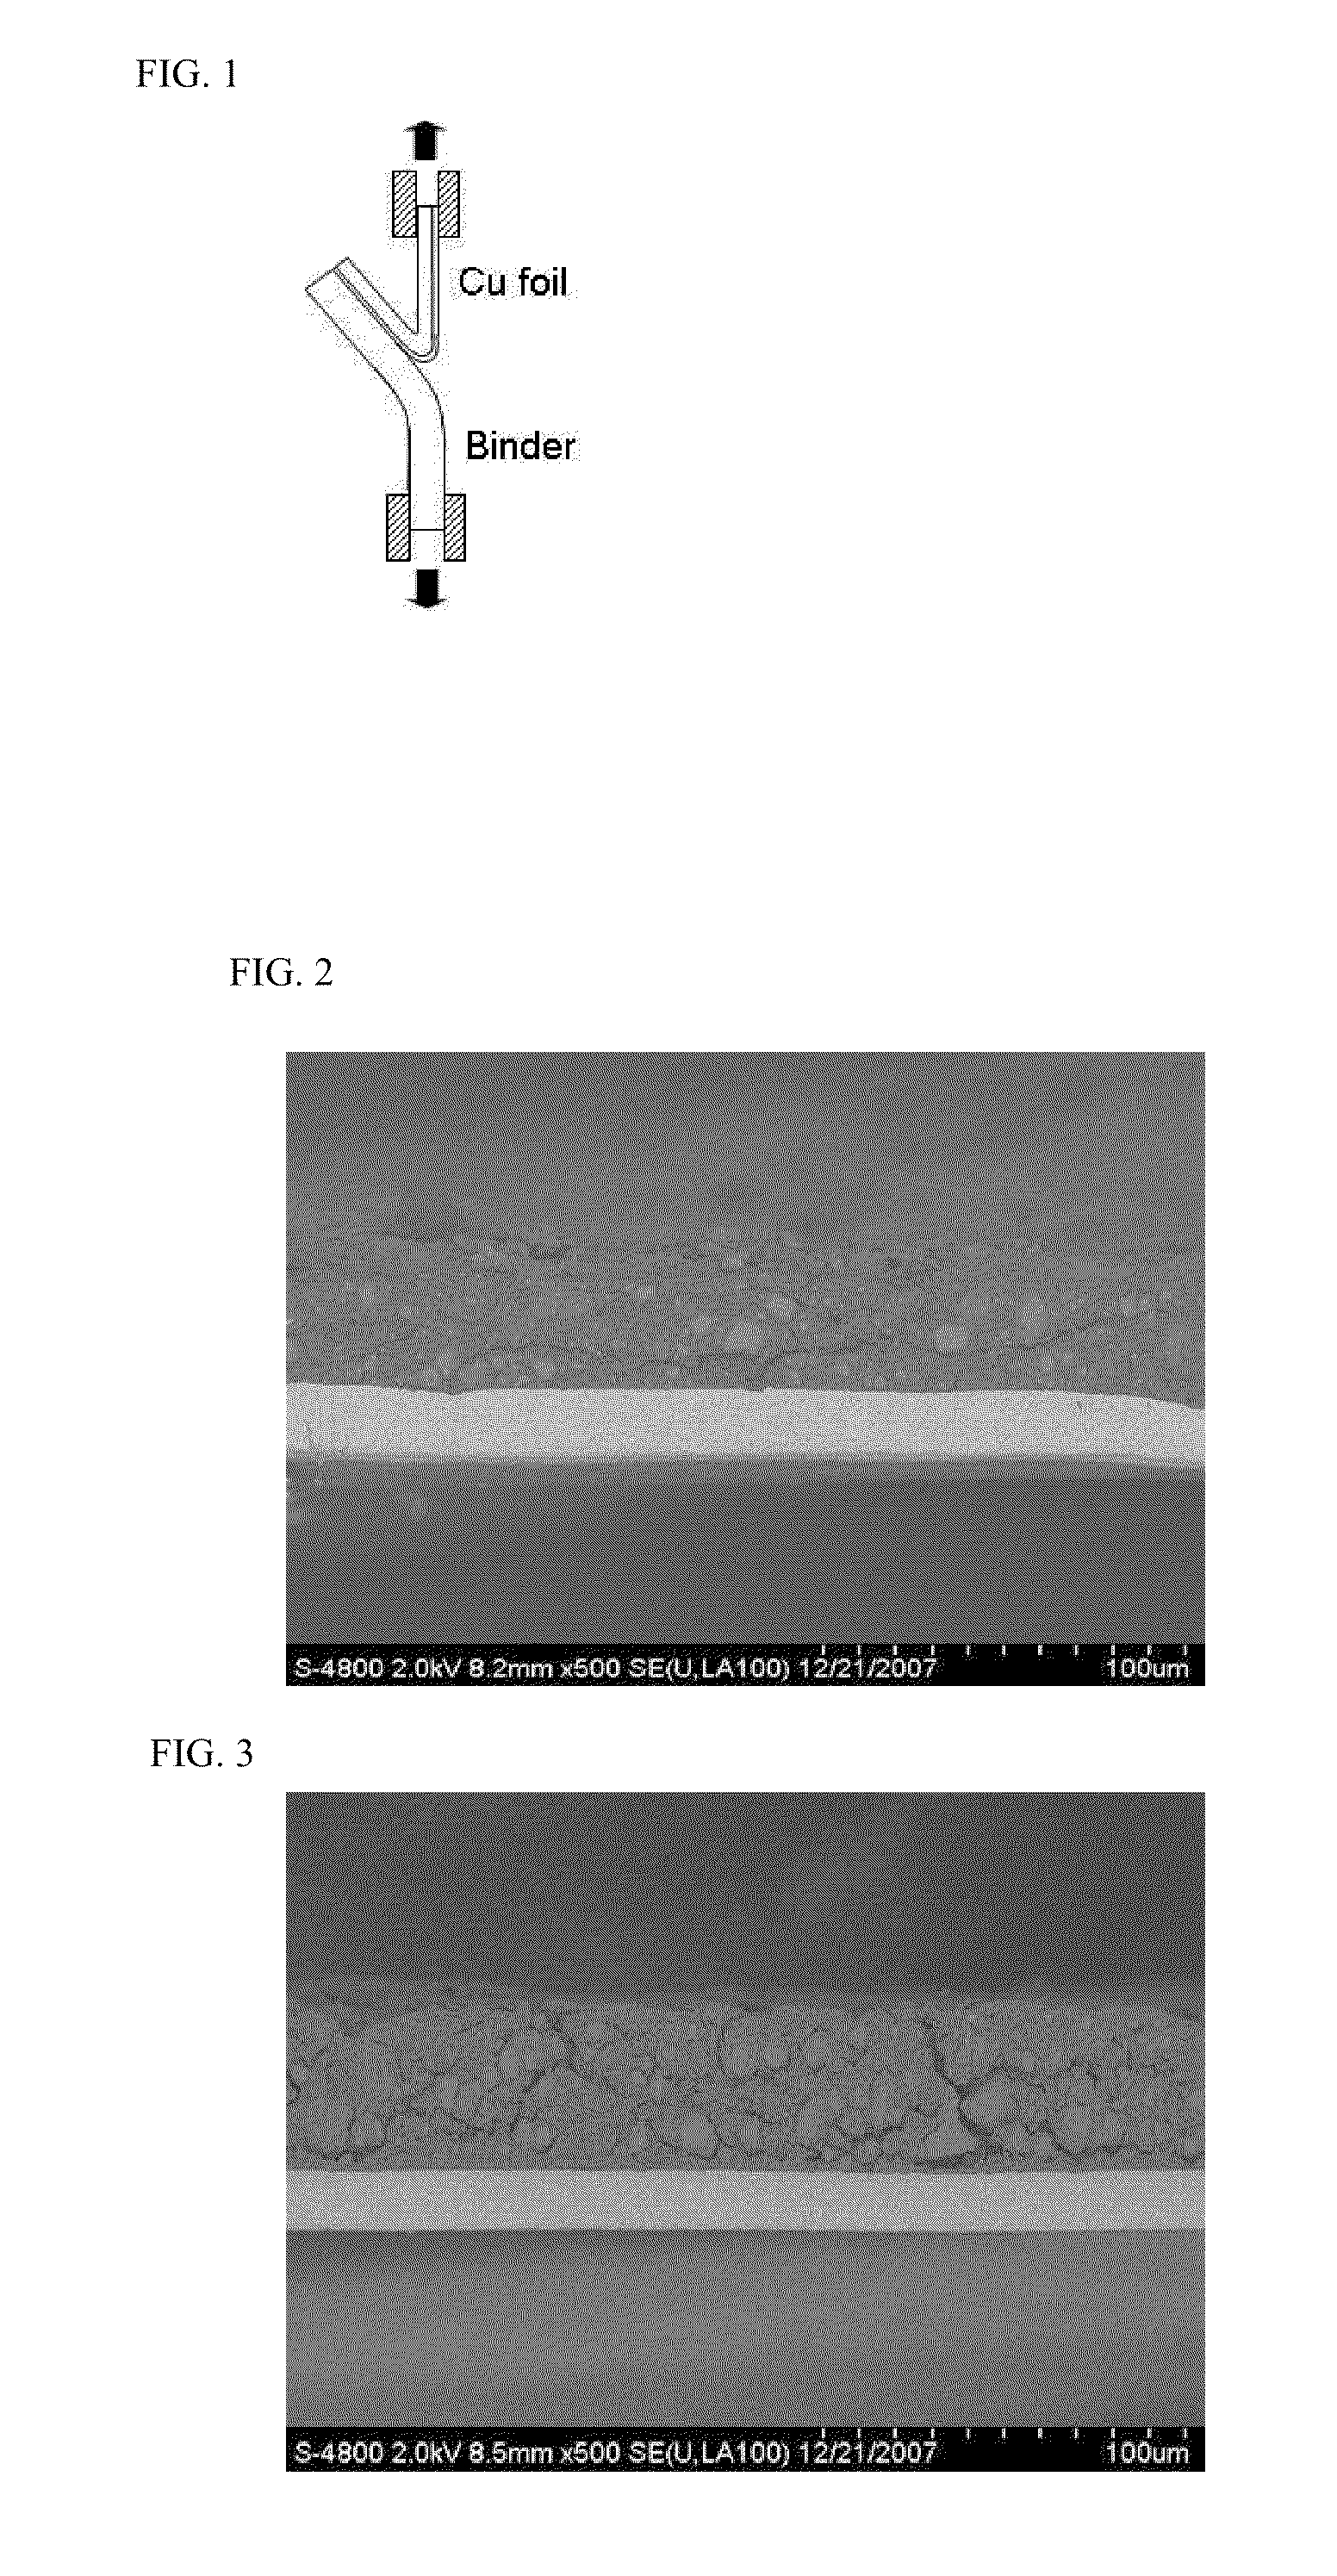 Electrode binder for secondary battery and secondary battery using the same